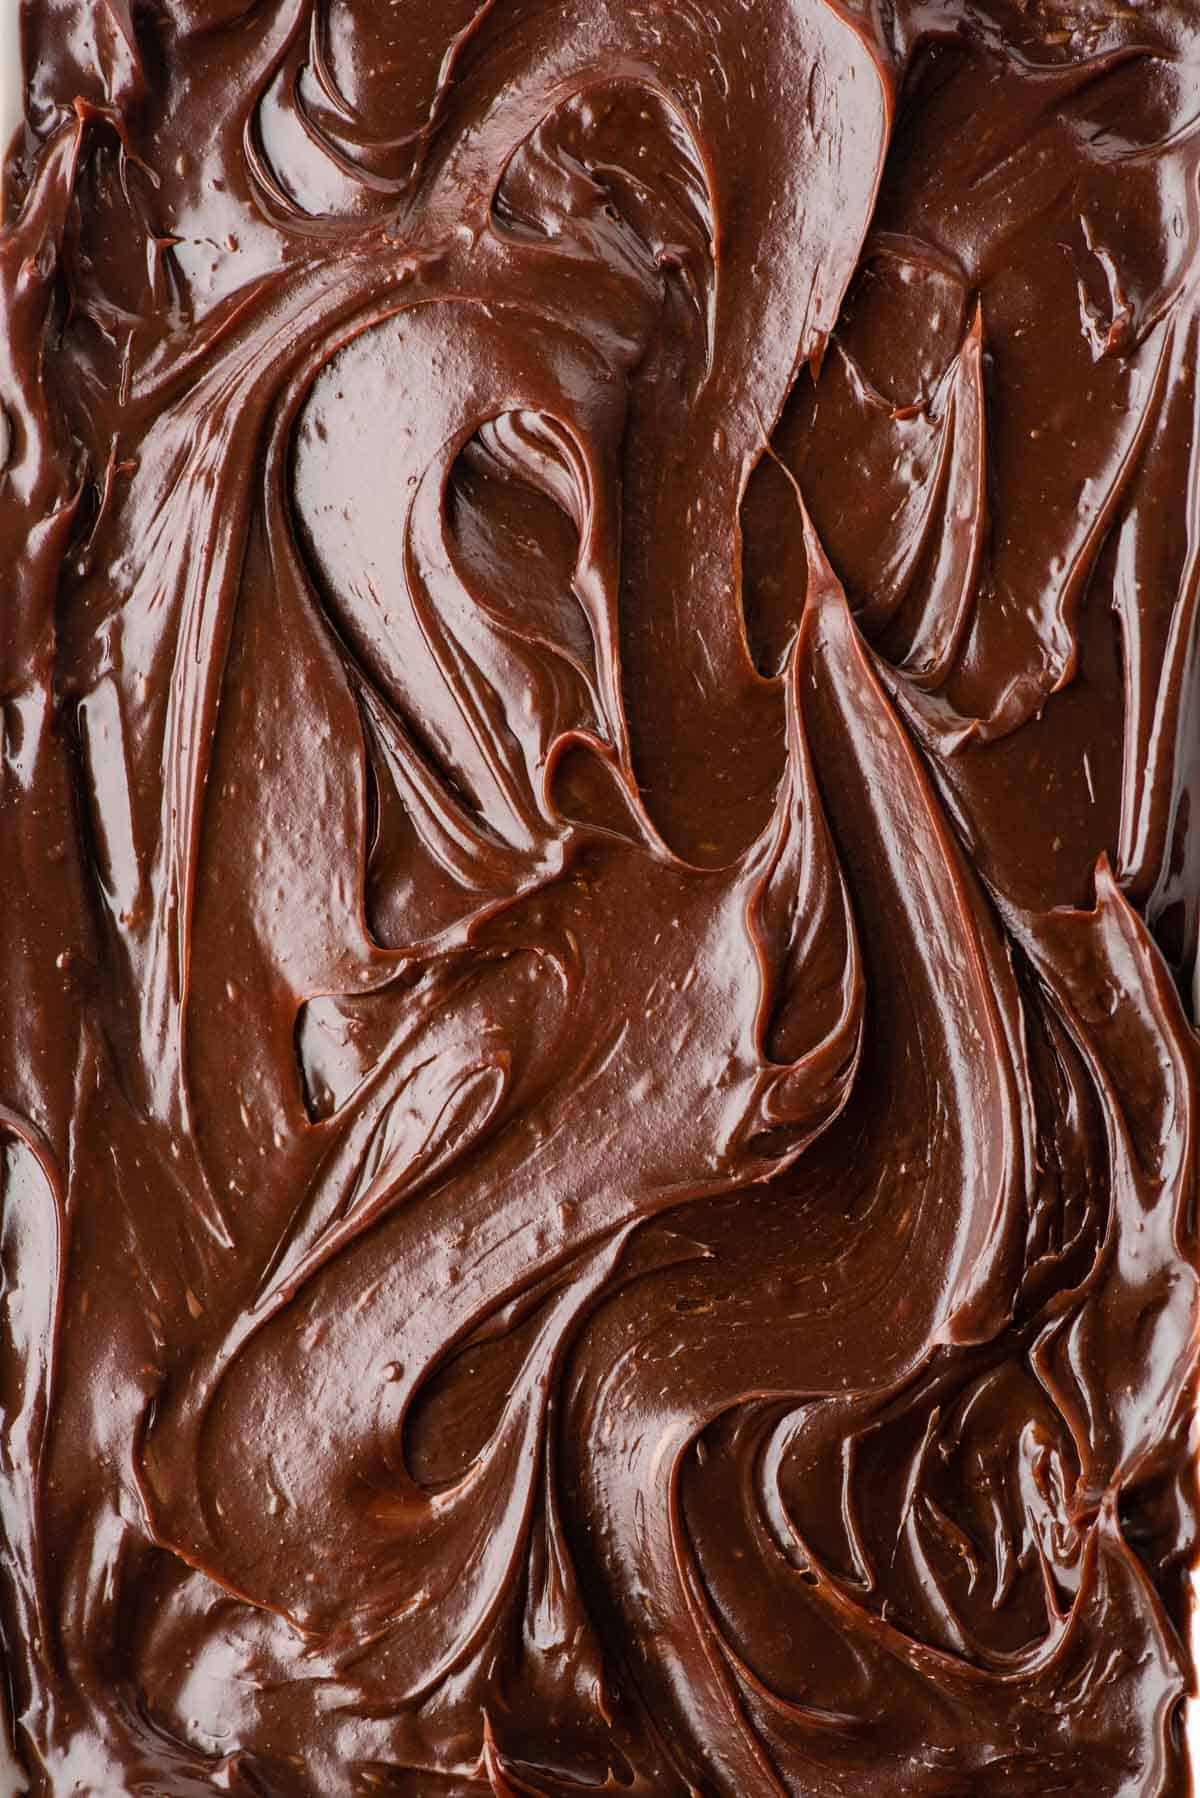 a close up of hot fudge sauce spread on a surface